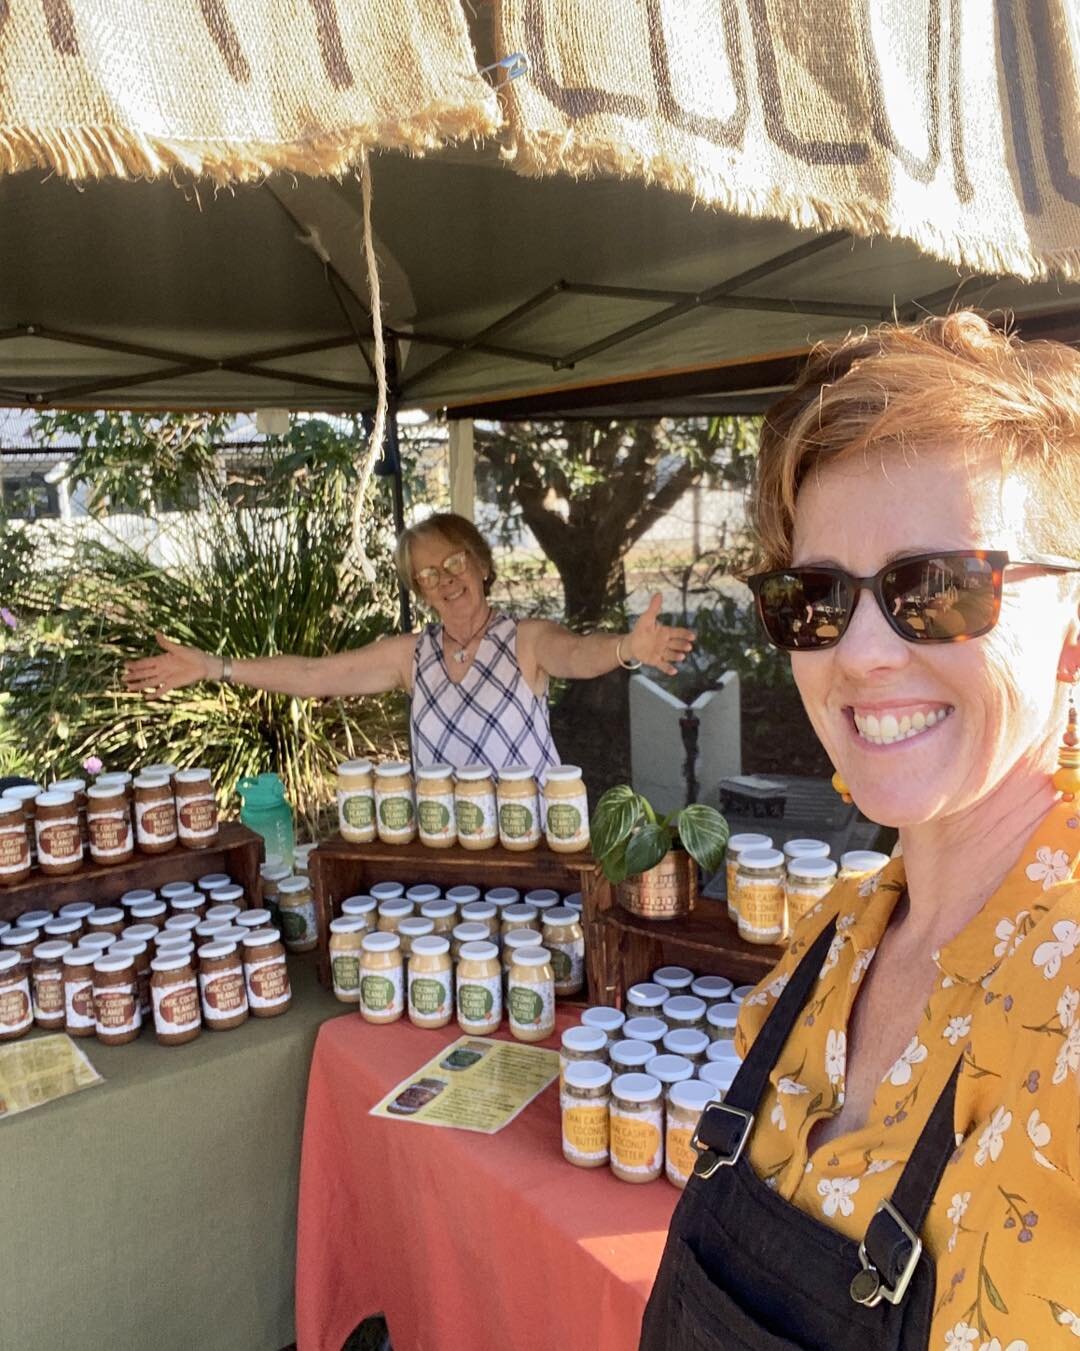 Good morning #redlandscoast folks! Come and enjoy this gorgeous Autumn morning at Redlands Coast Collective Markets at Faith High School in Victoria Point. 
We have HEAPS of delicious nut butters as it&rsquo;s getting into good toast weather! 
These 